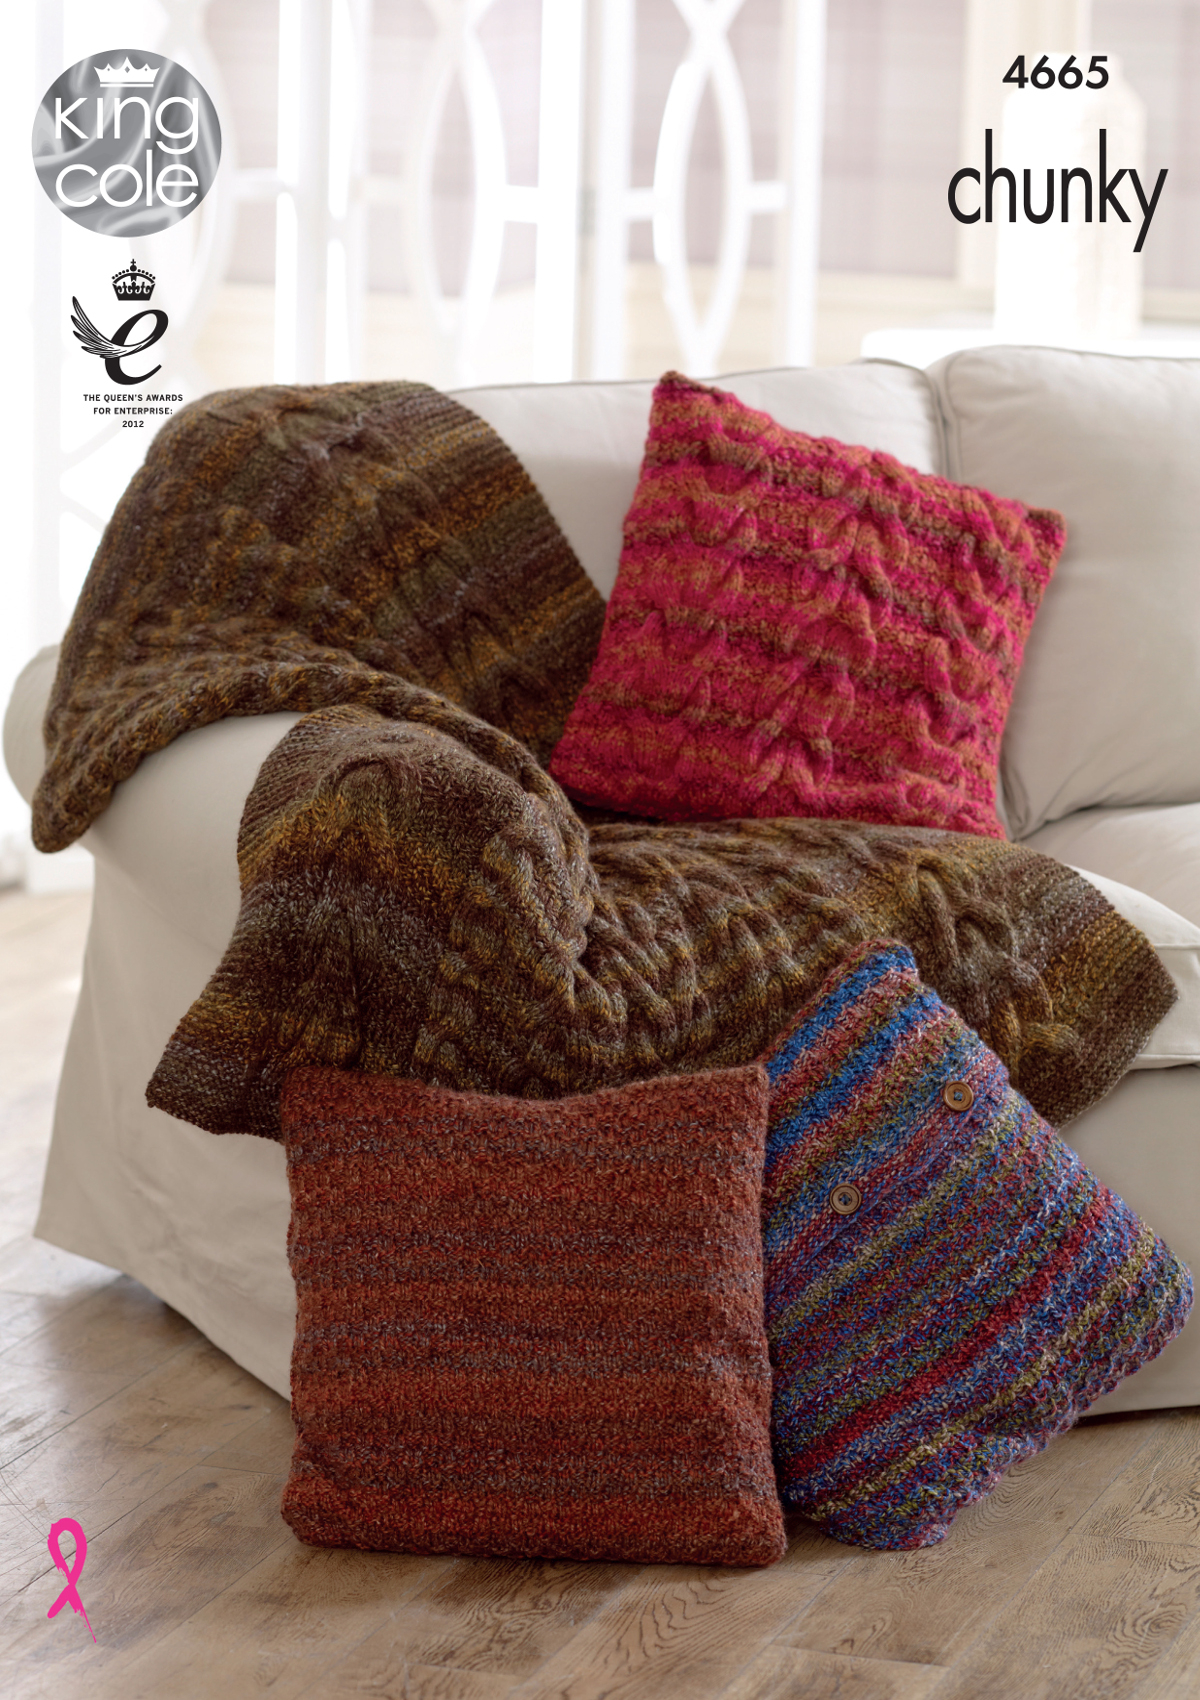 Knitting Pattern For Cushion Cover With Cables Details About King Cole Chunky Knitting Pattern Throw Cable Moss Stitch Cushion Covers 4665